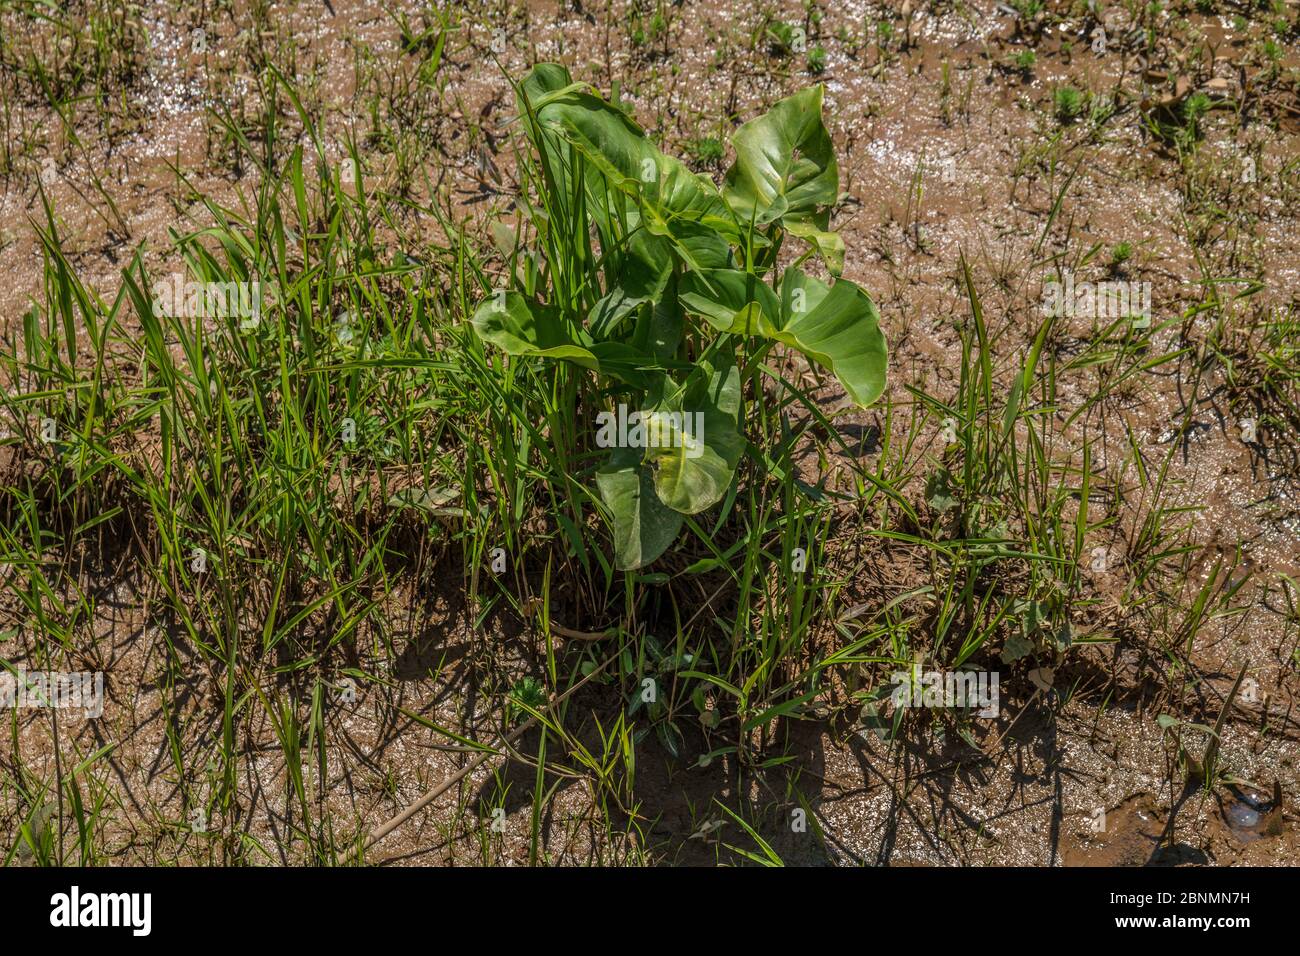 A Broad leaf arrowhead plant just emerging with large leaves in the mud at the wetlands with surrounding grasses on a bright sunny day in springtime Stock Photo